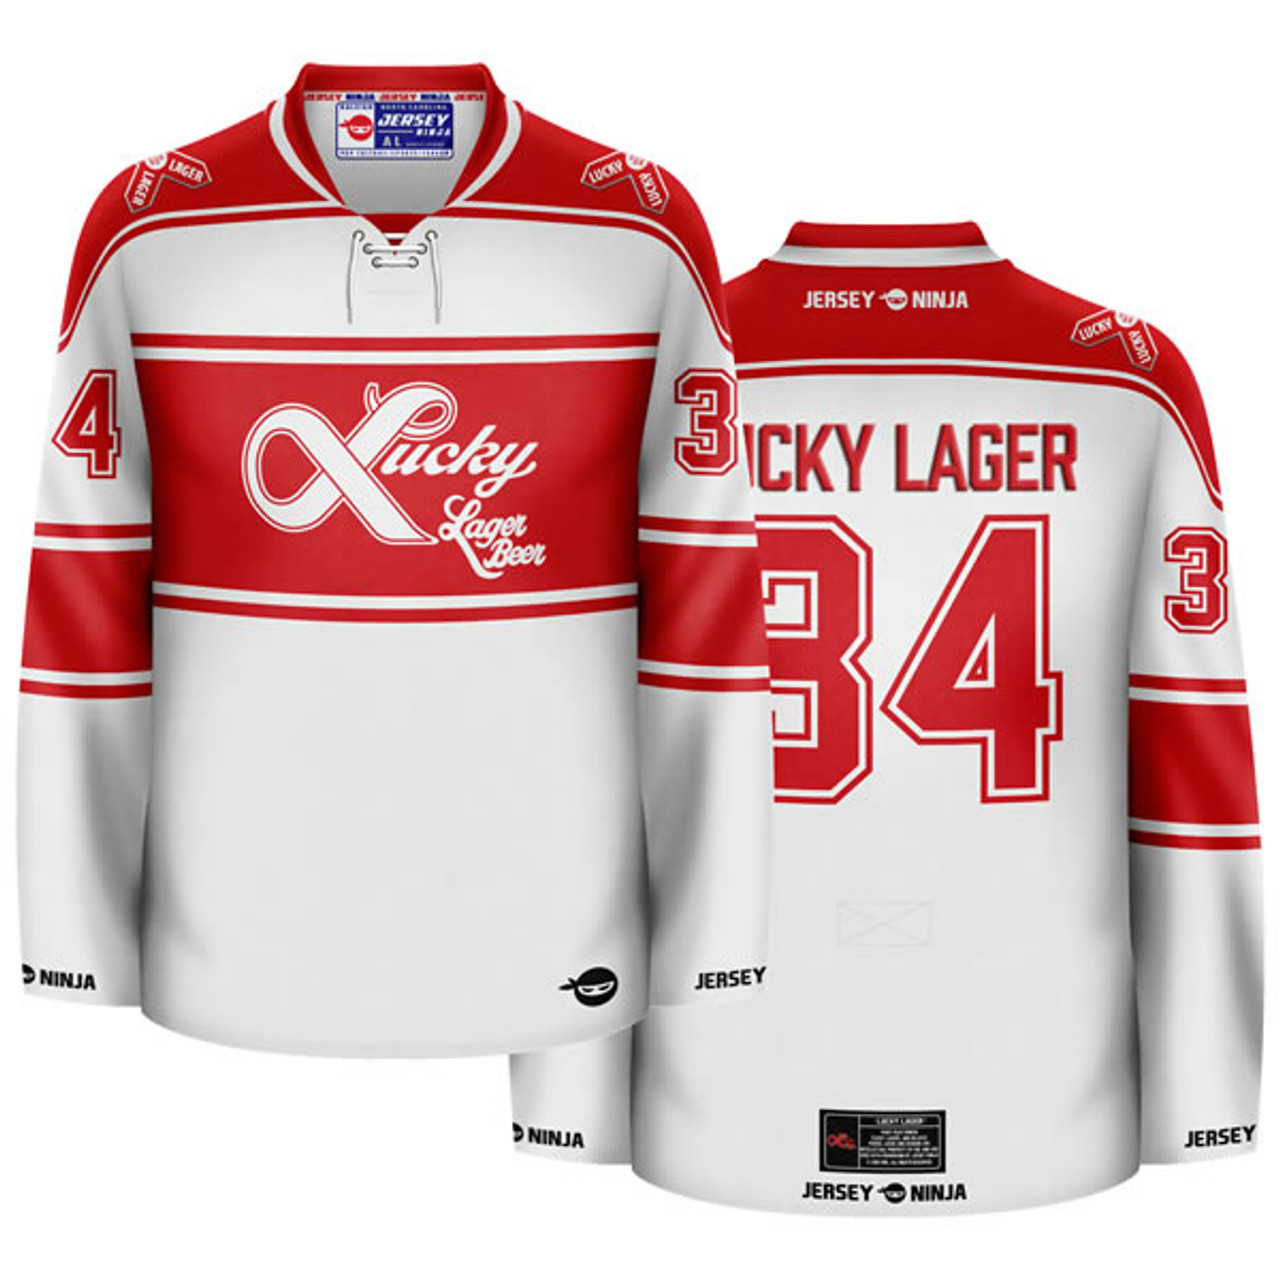 SW300 Reversible Practice Hockey Jersey - Red/White